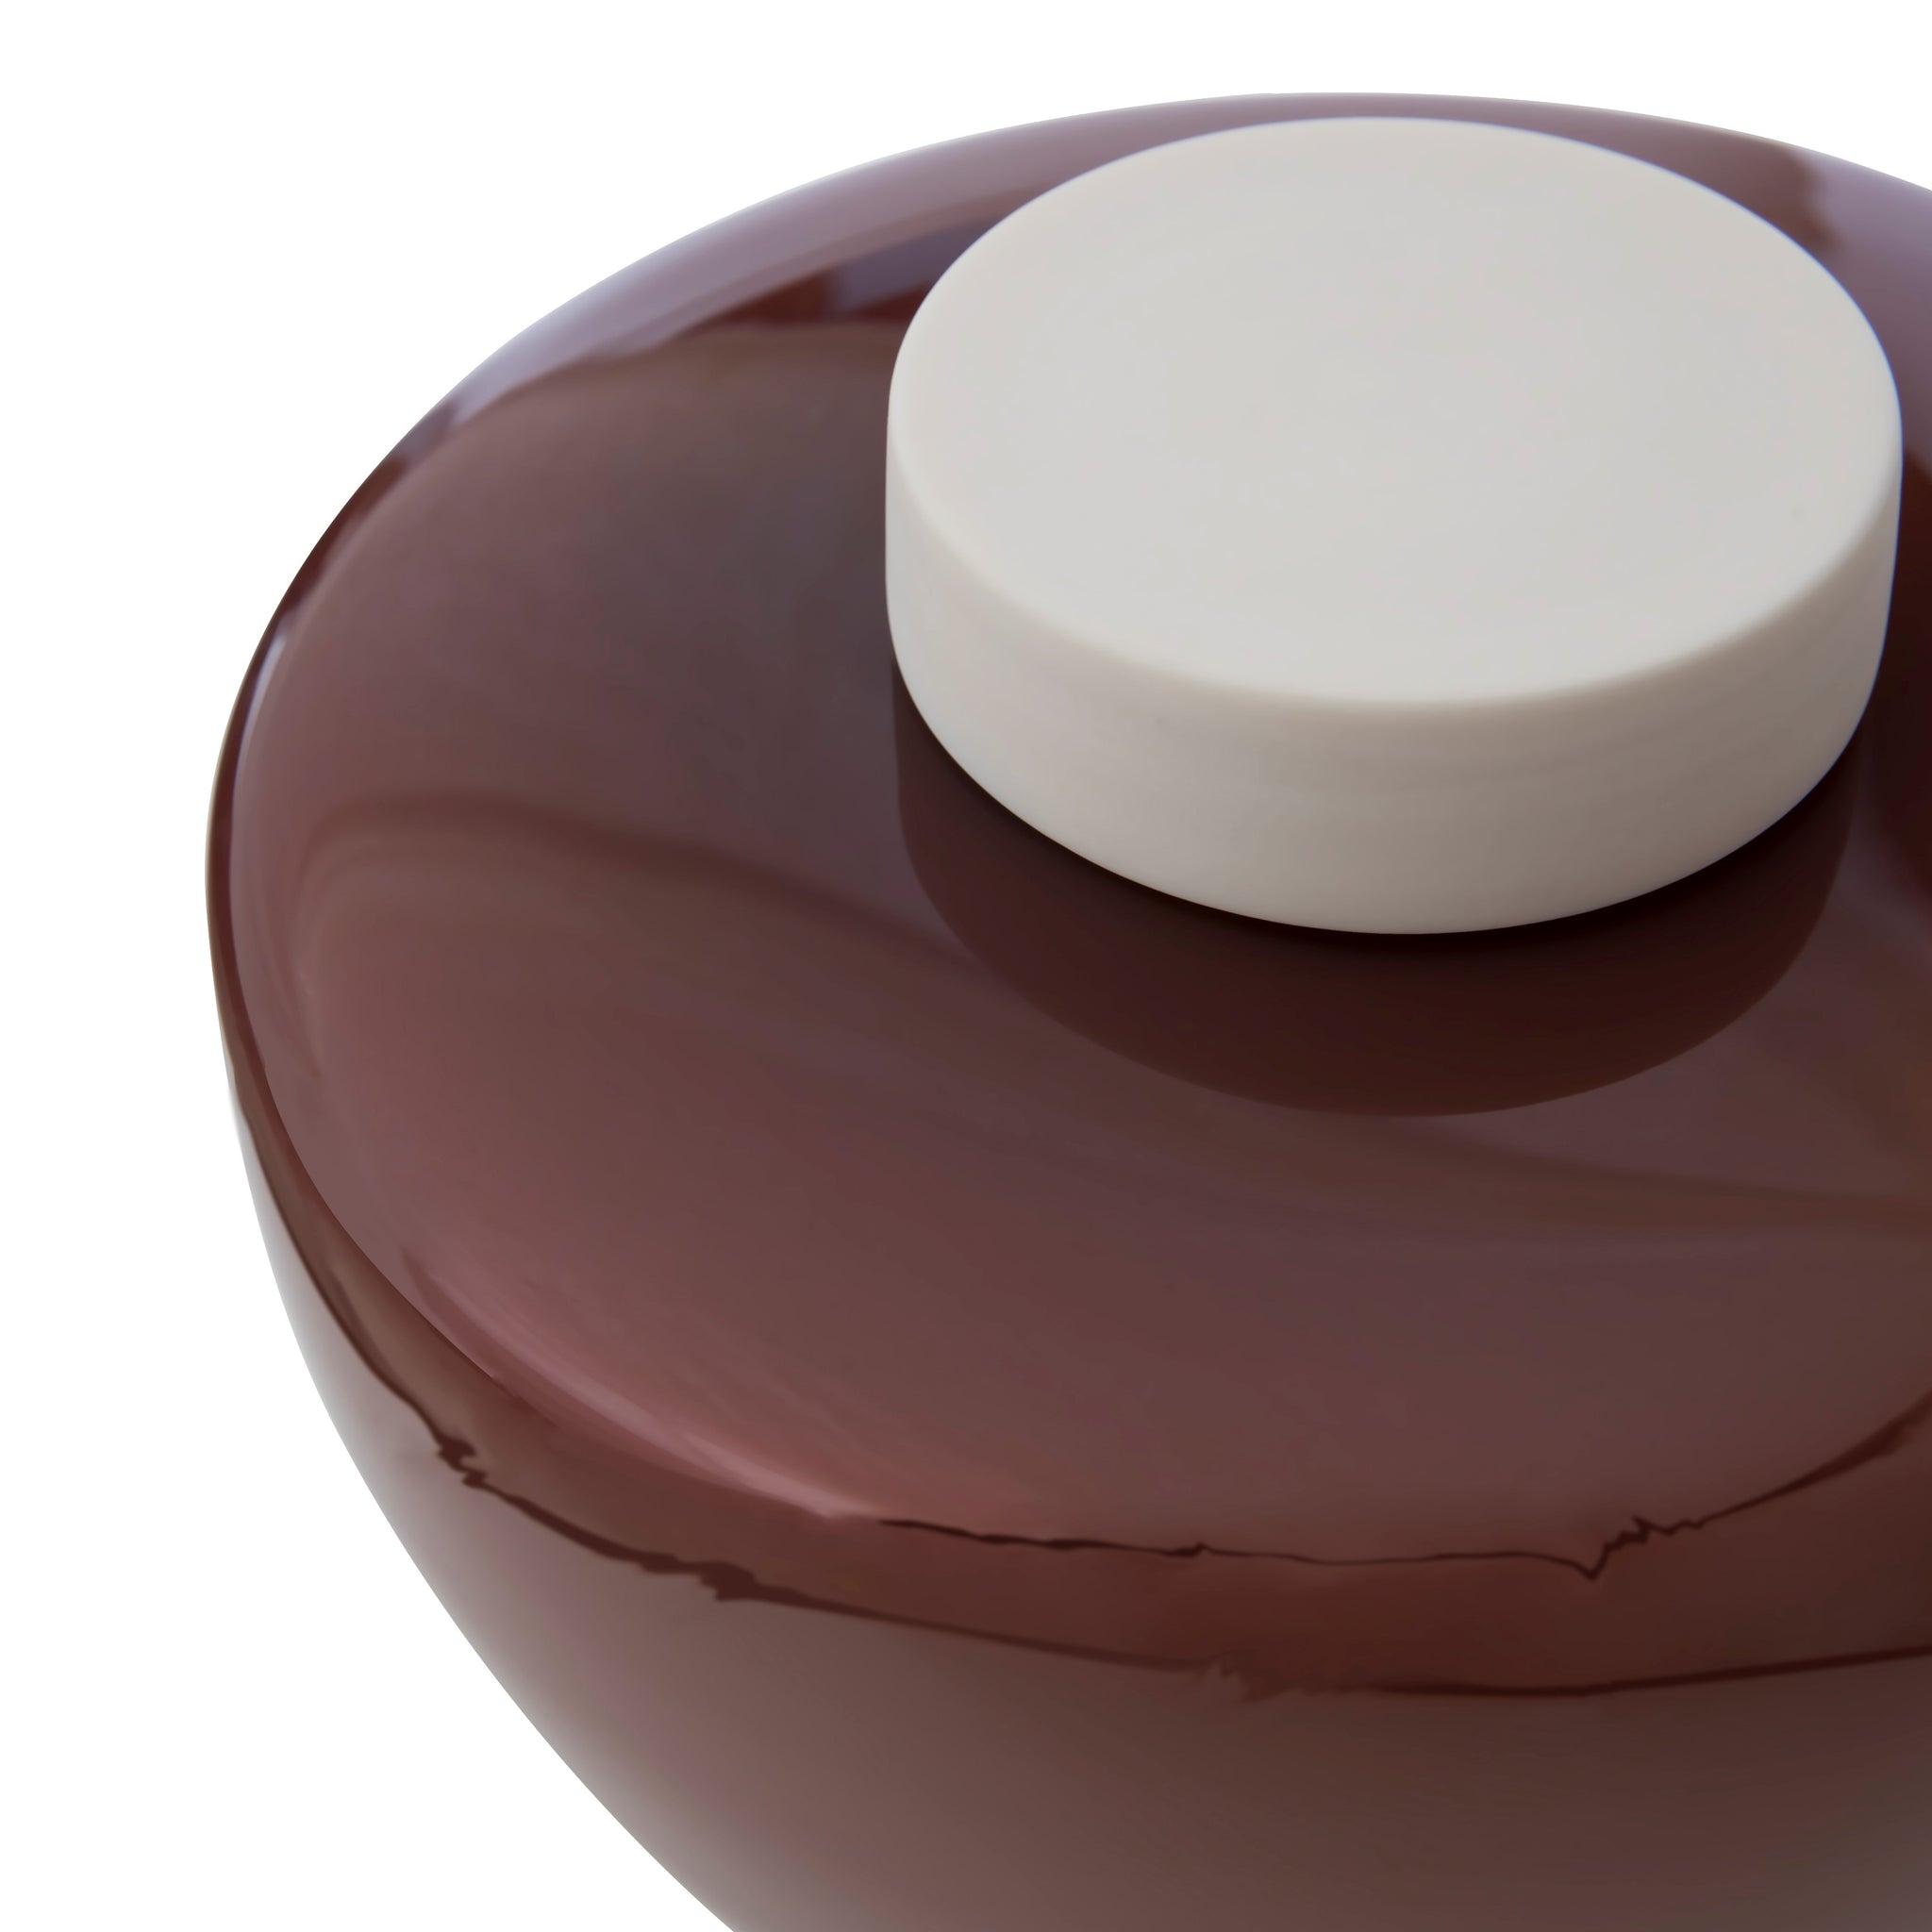 Picture of a deep mahogany blown glass cremation urn for adult on sale at Muses Design Urns.Top view. Glossy finish.